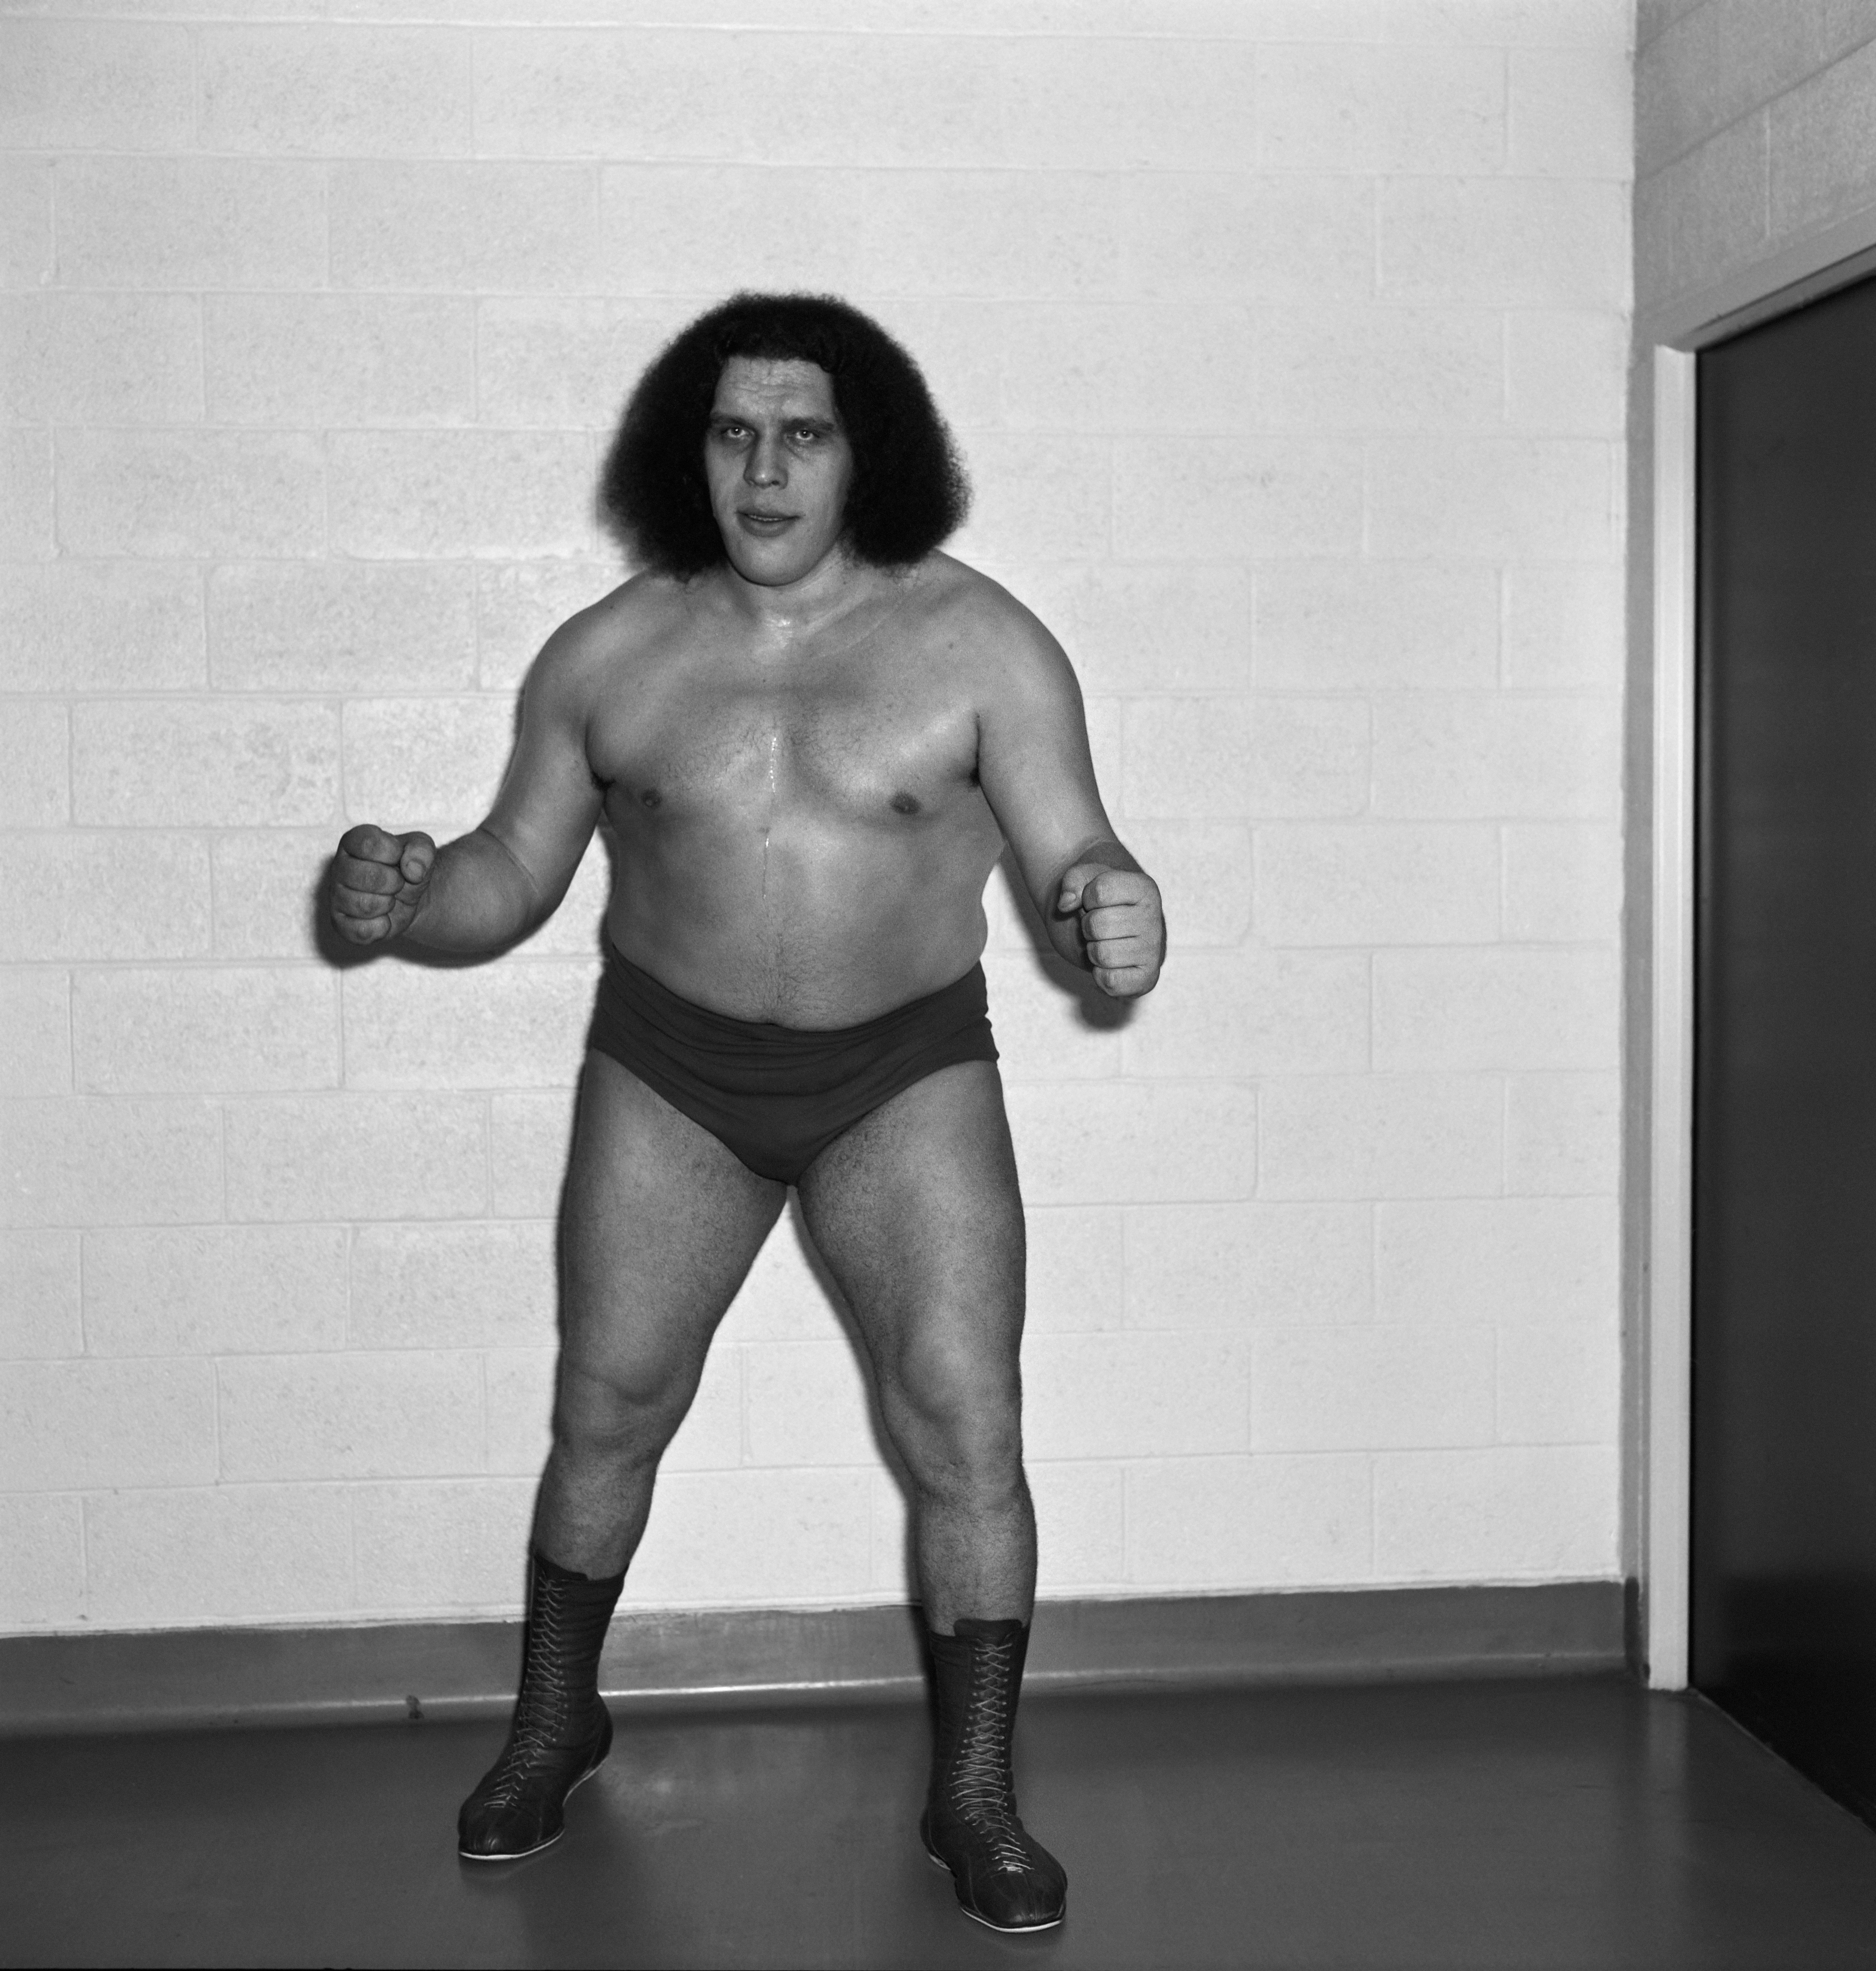 Andre the Giant poses for the camera in Montreal, Canada on 25 Aug 1980 | Source: Getty Images